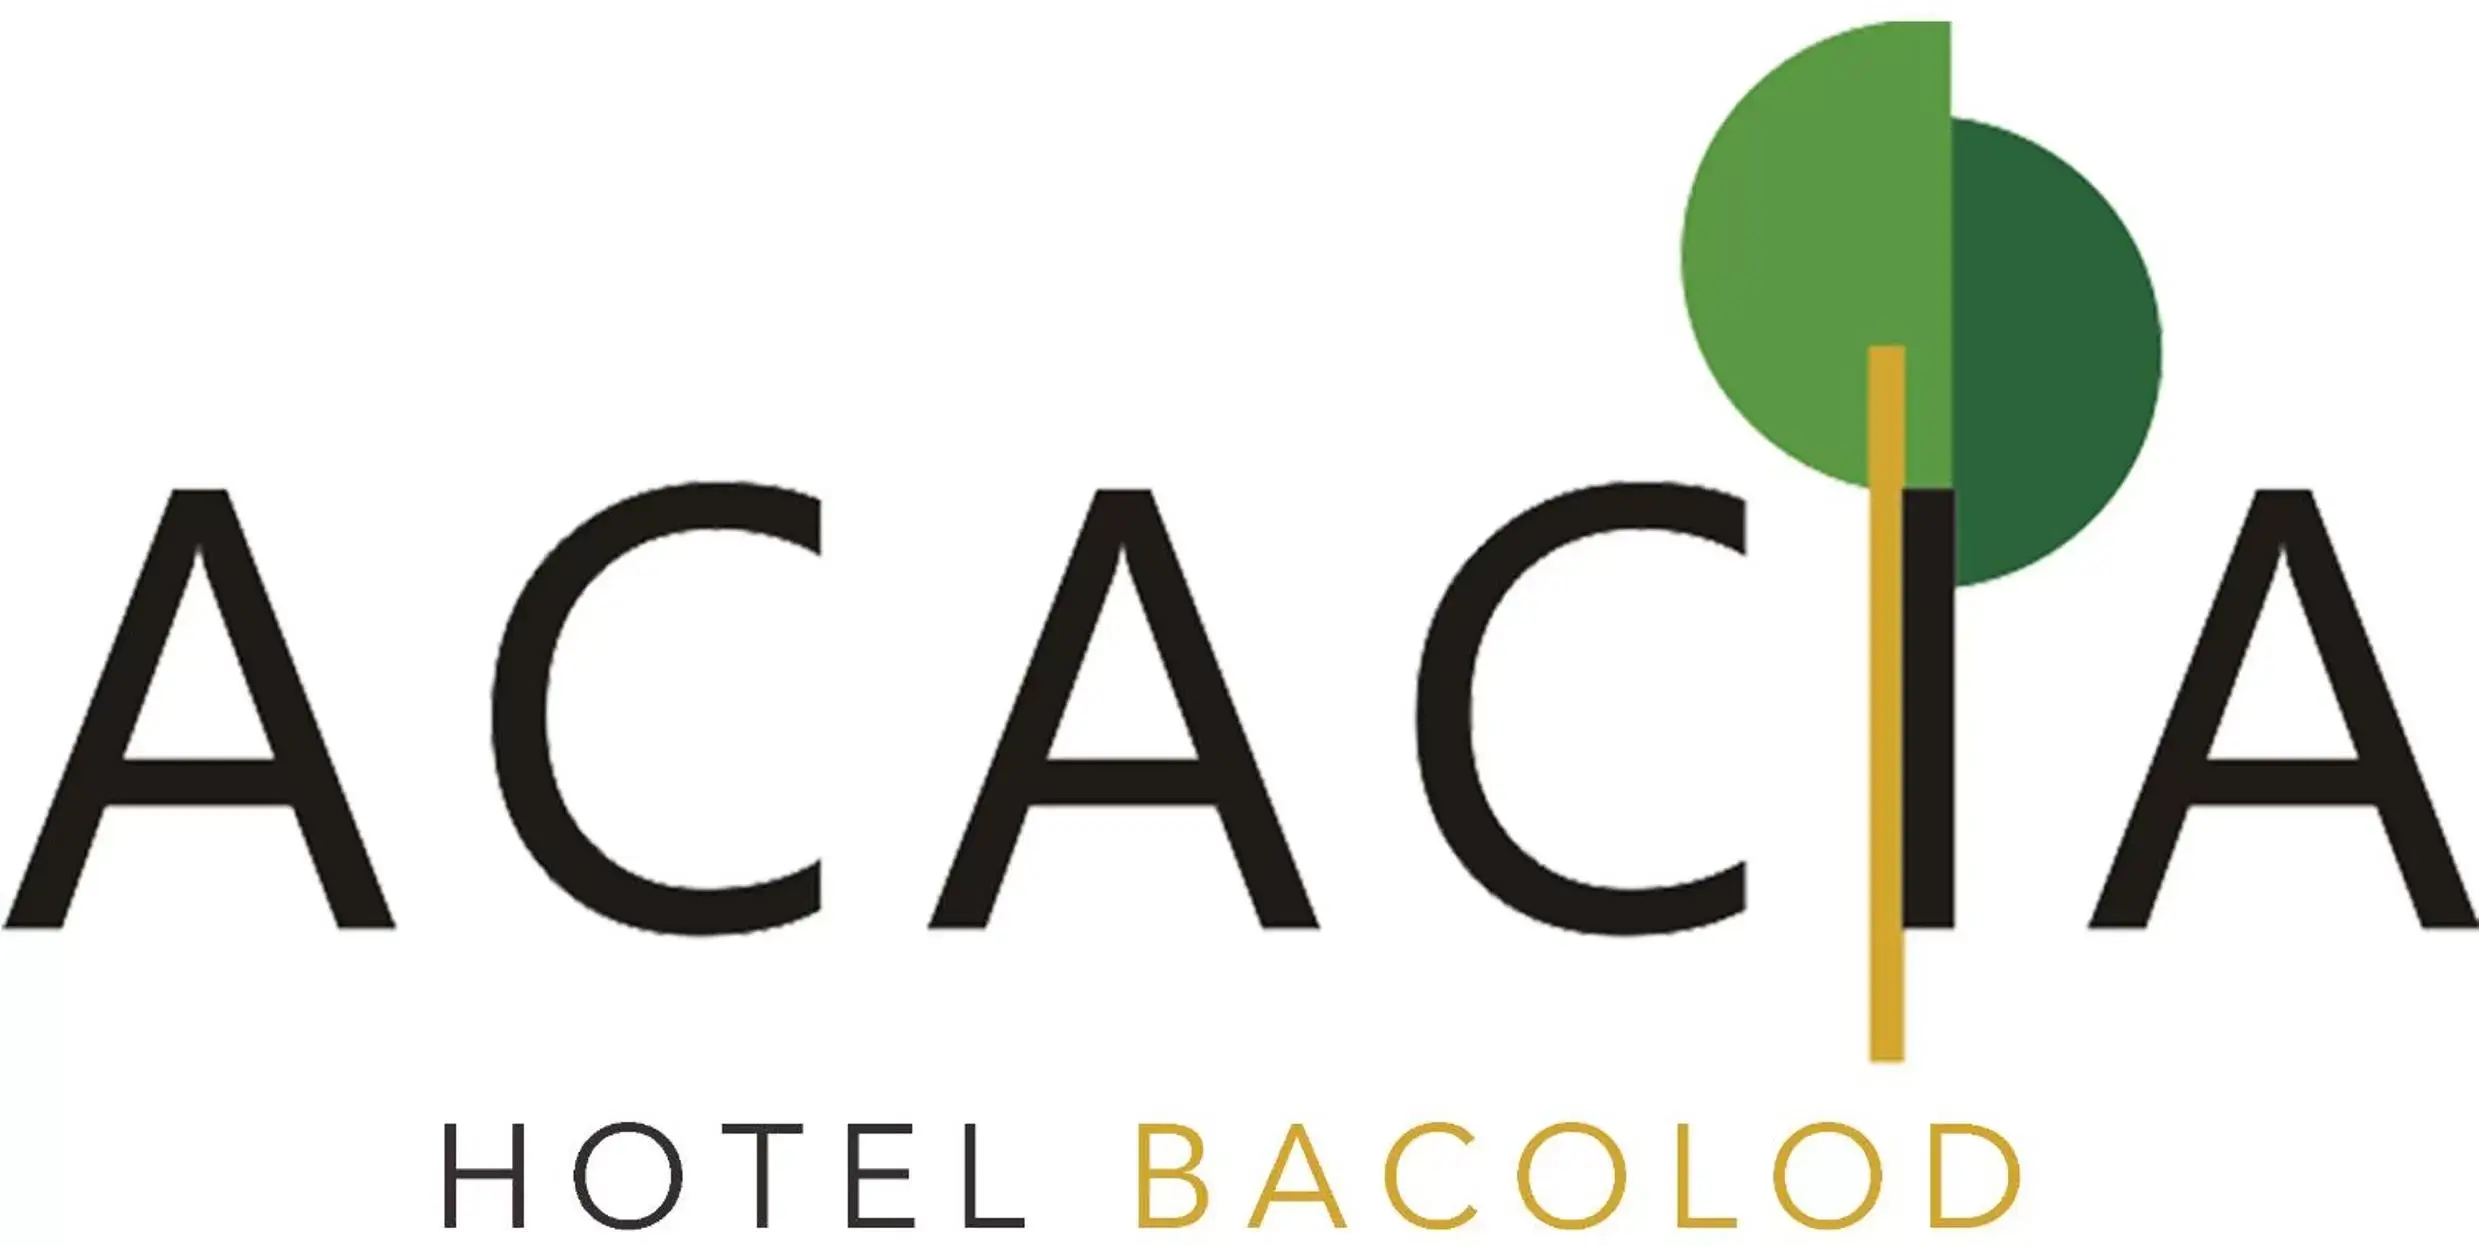 Property logo or sign, Property Logo/Sign in Acacia Hotel Bacolod